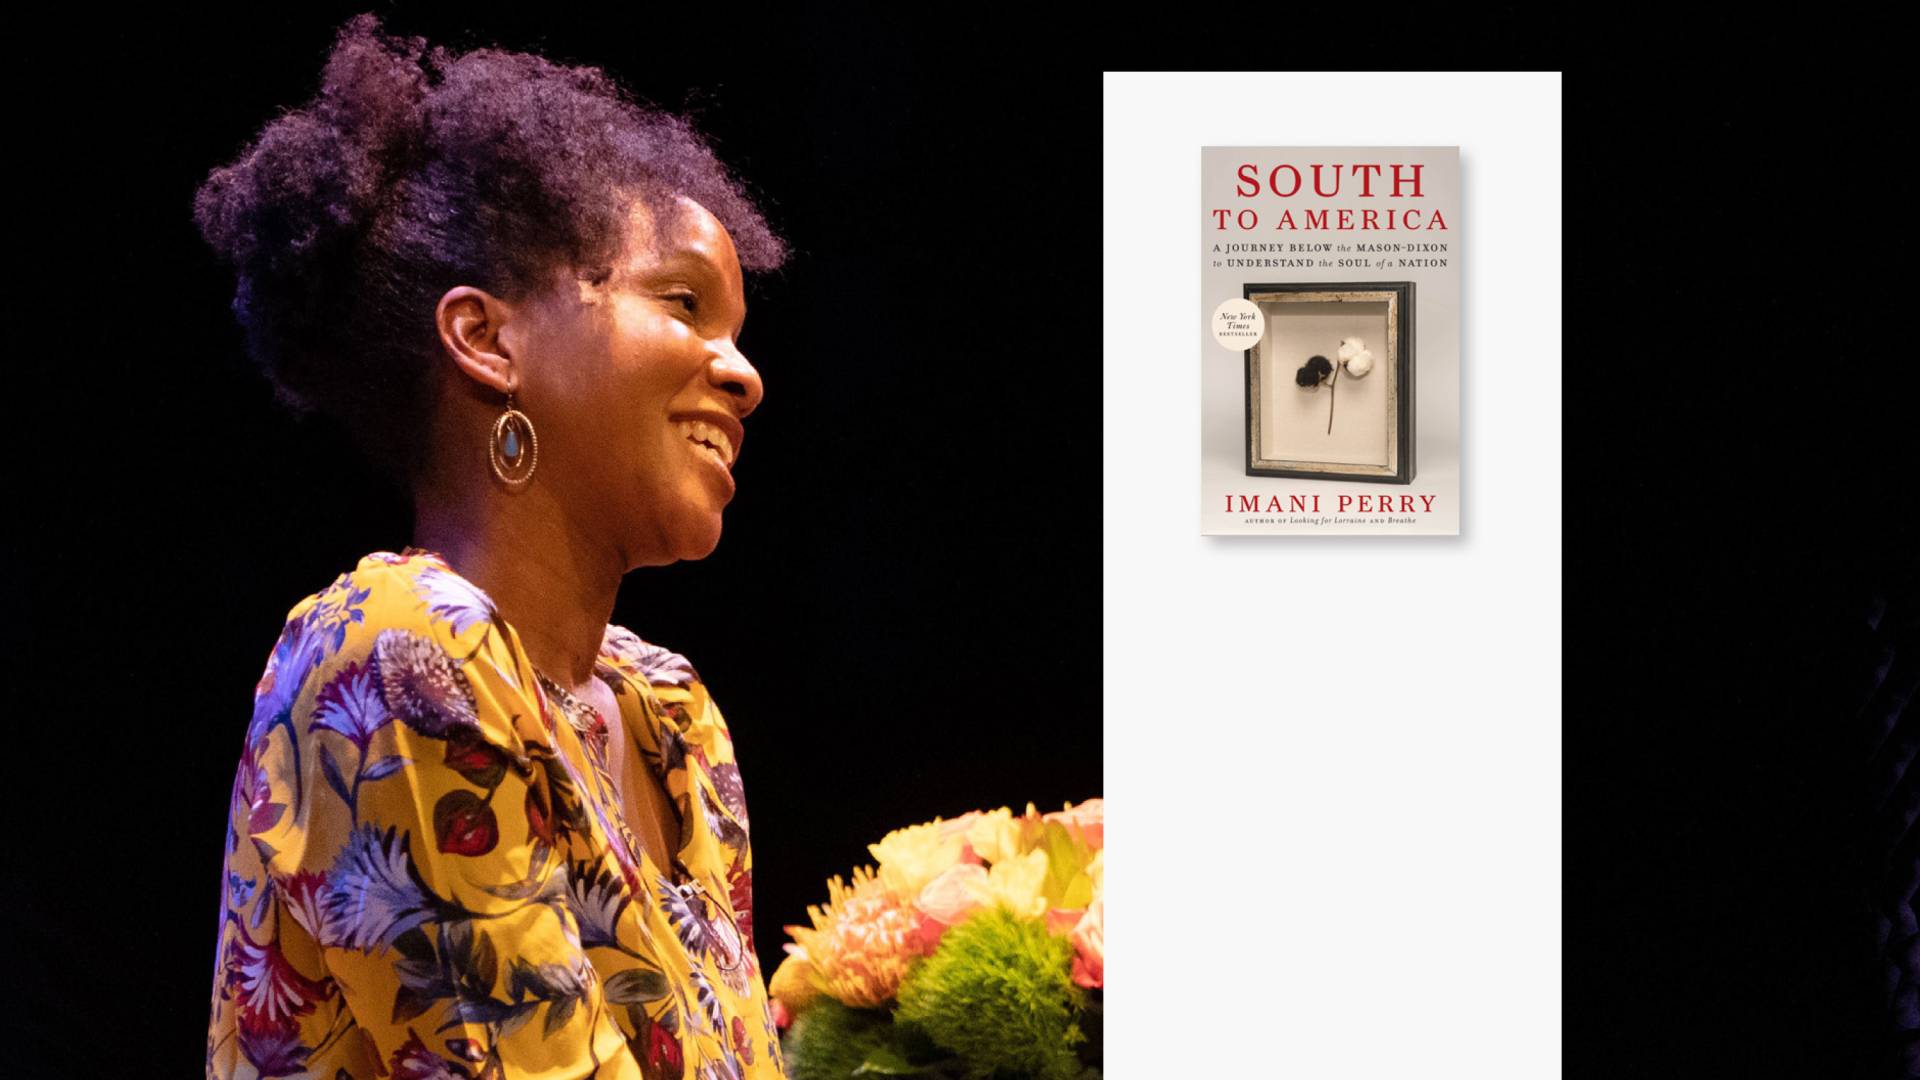 Imani Perry and her book titled South to America